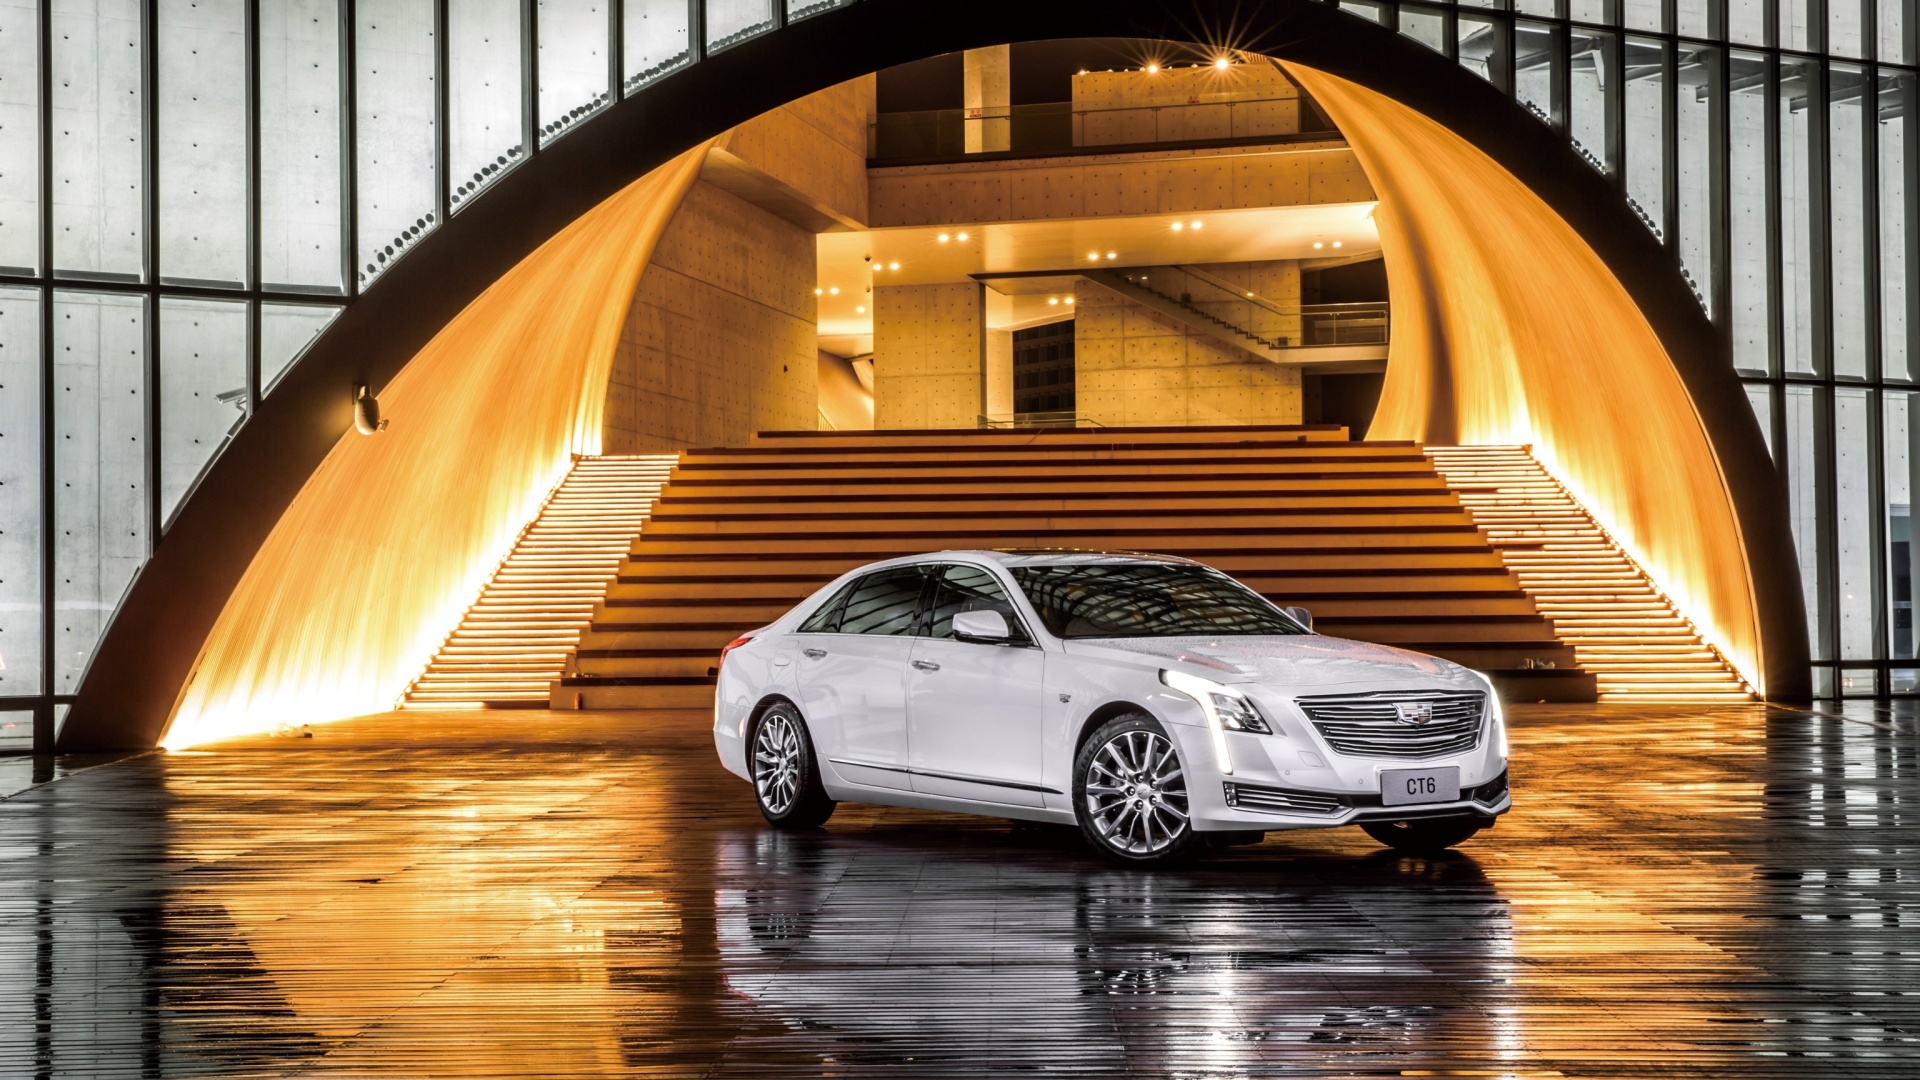 Cadillac CT6 on Auto Show wallpaper 1920x1080